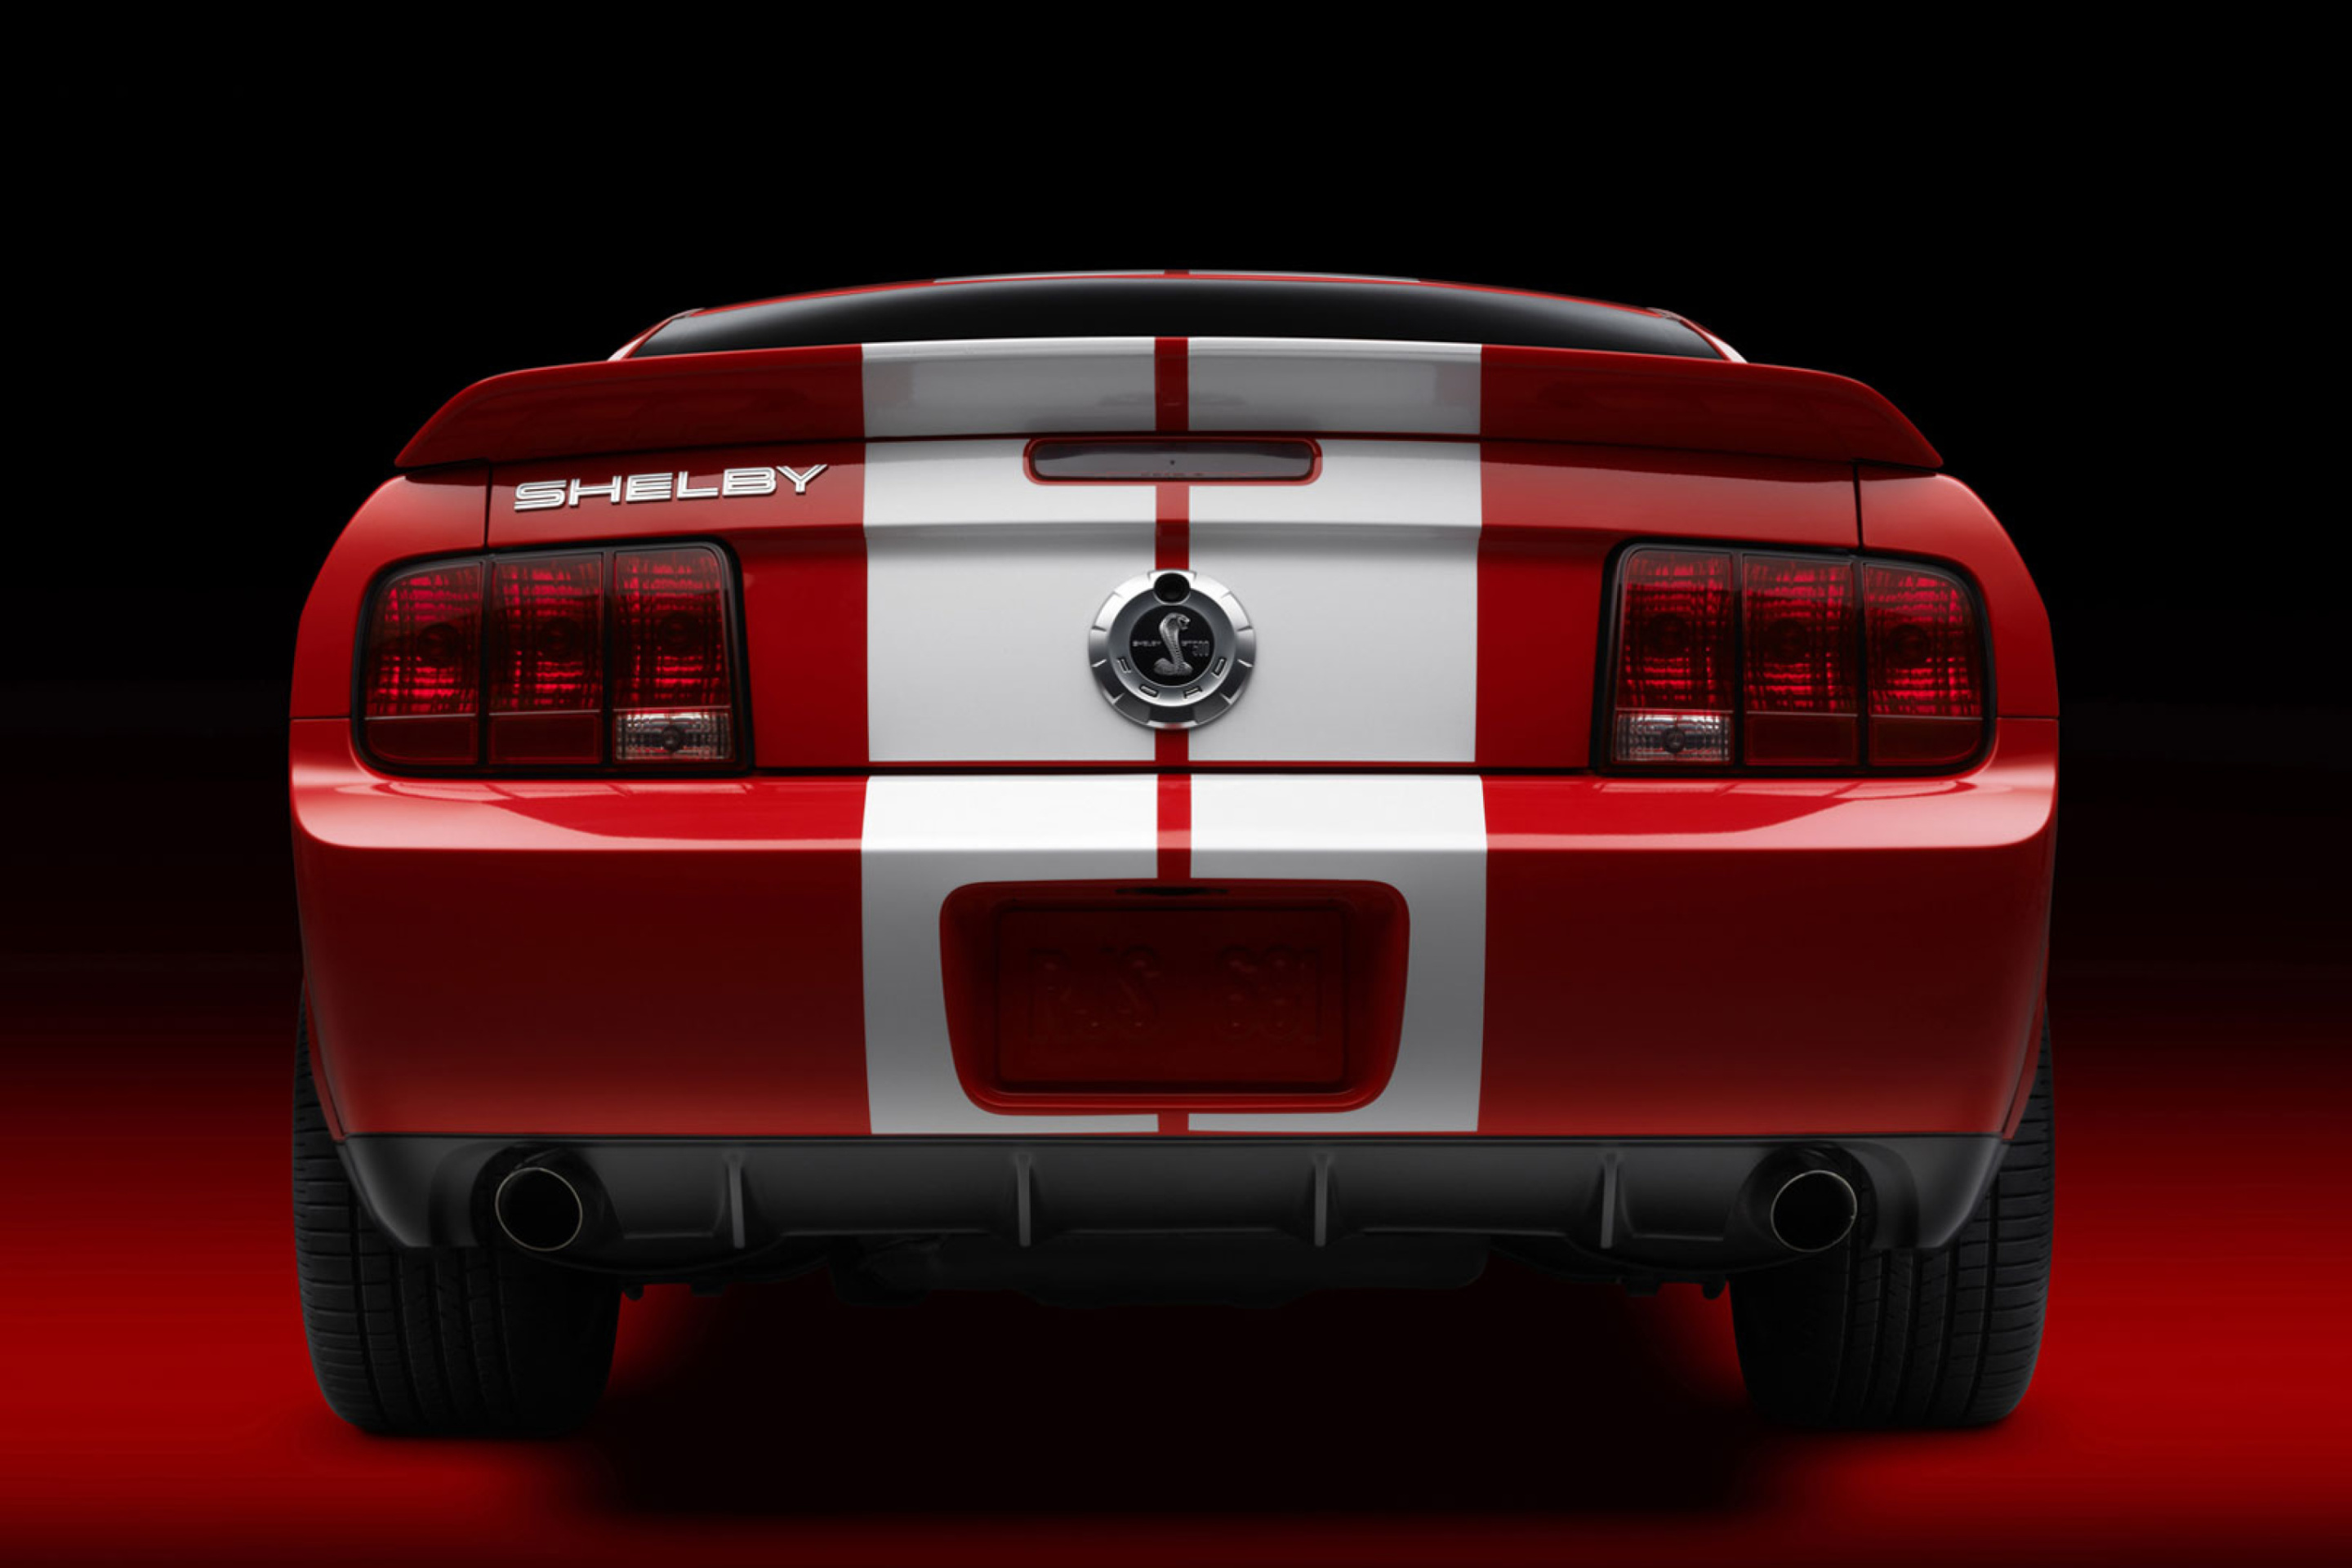 Ford Mustang Shelby GT500 wallpaper 2880x1920